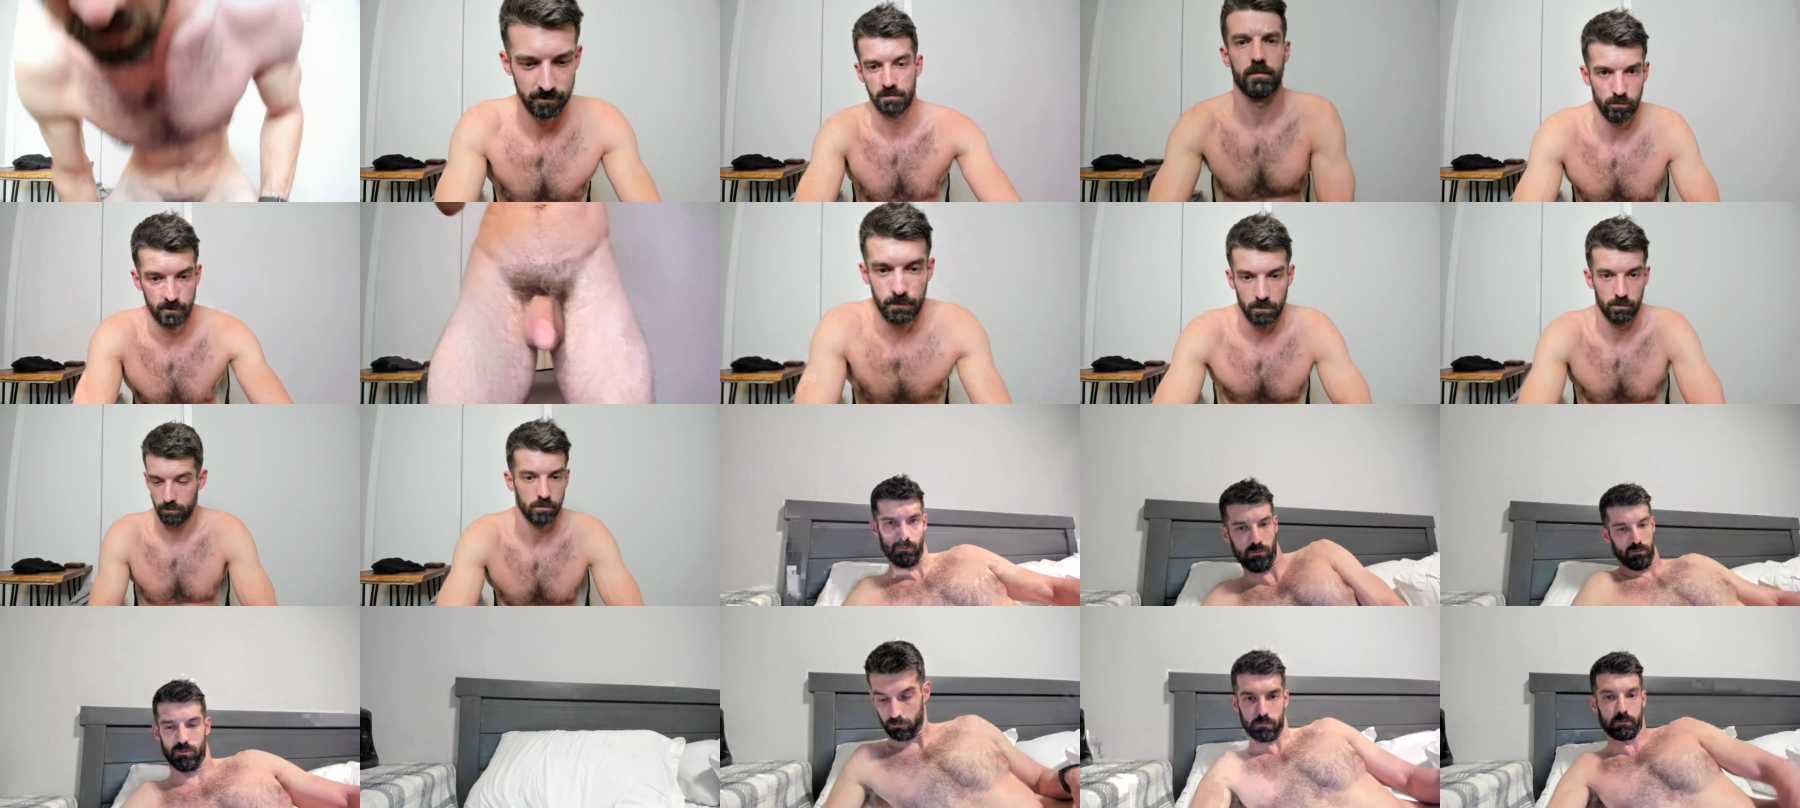 Kennykyle  02-11-2021 Male Topless